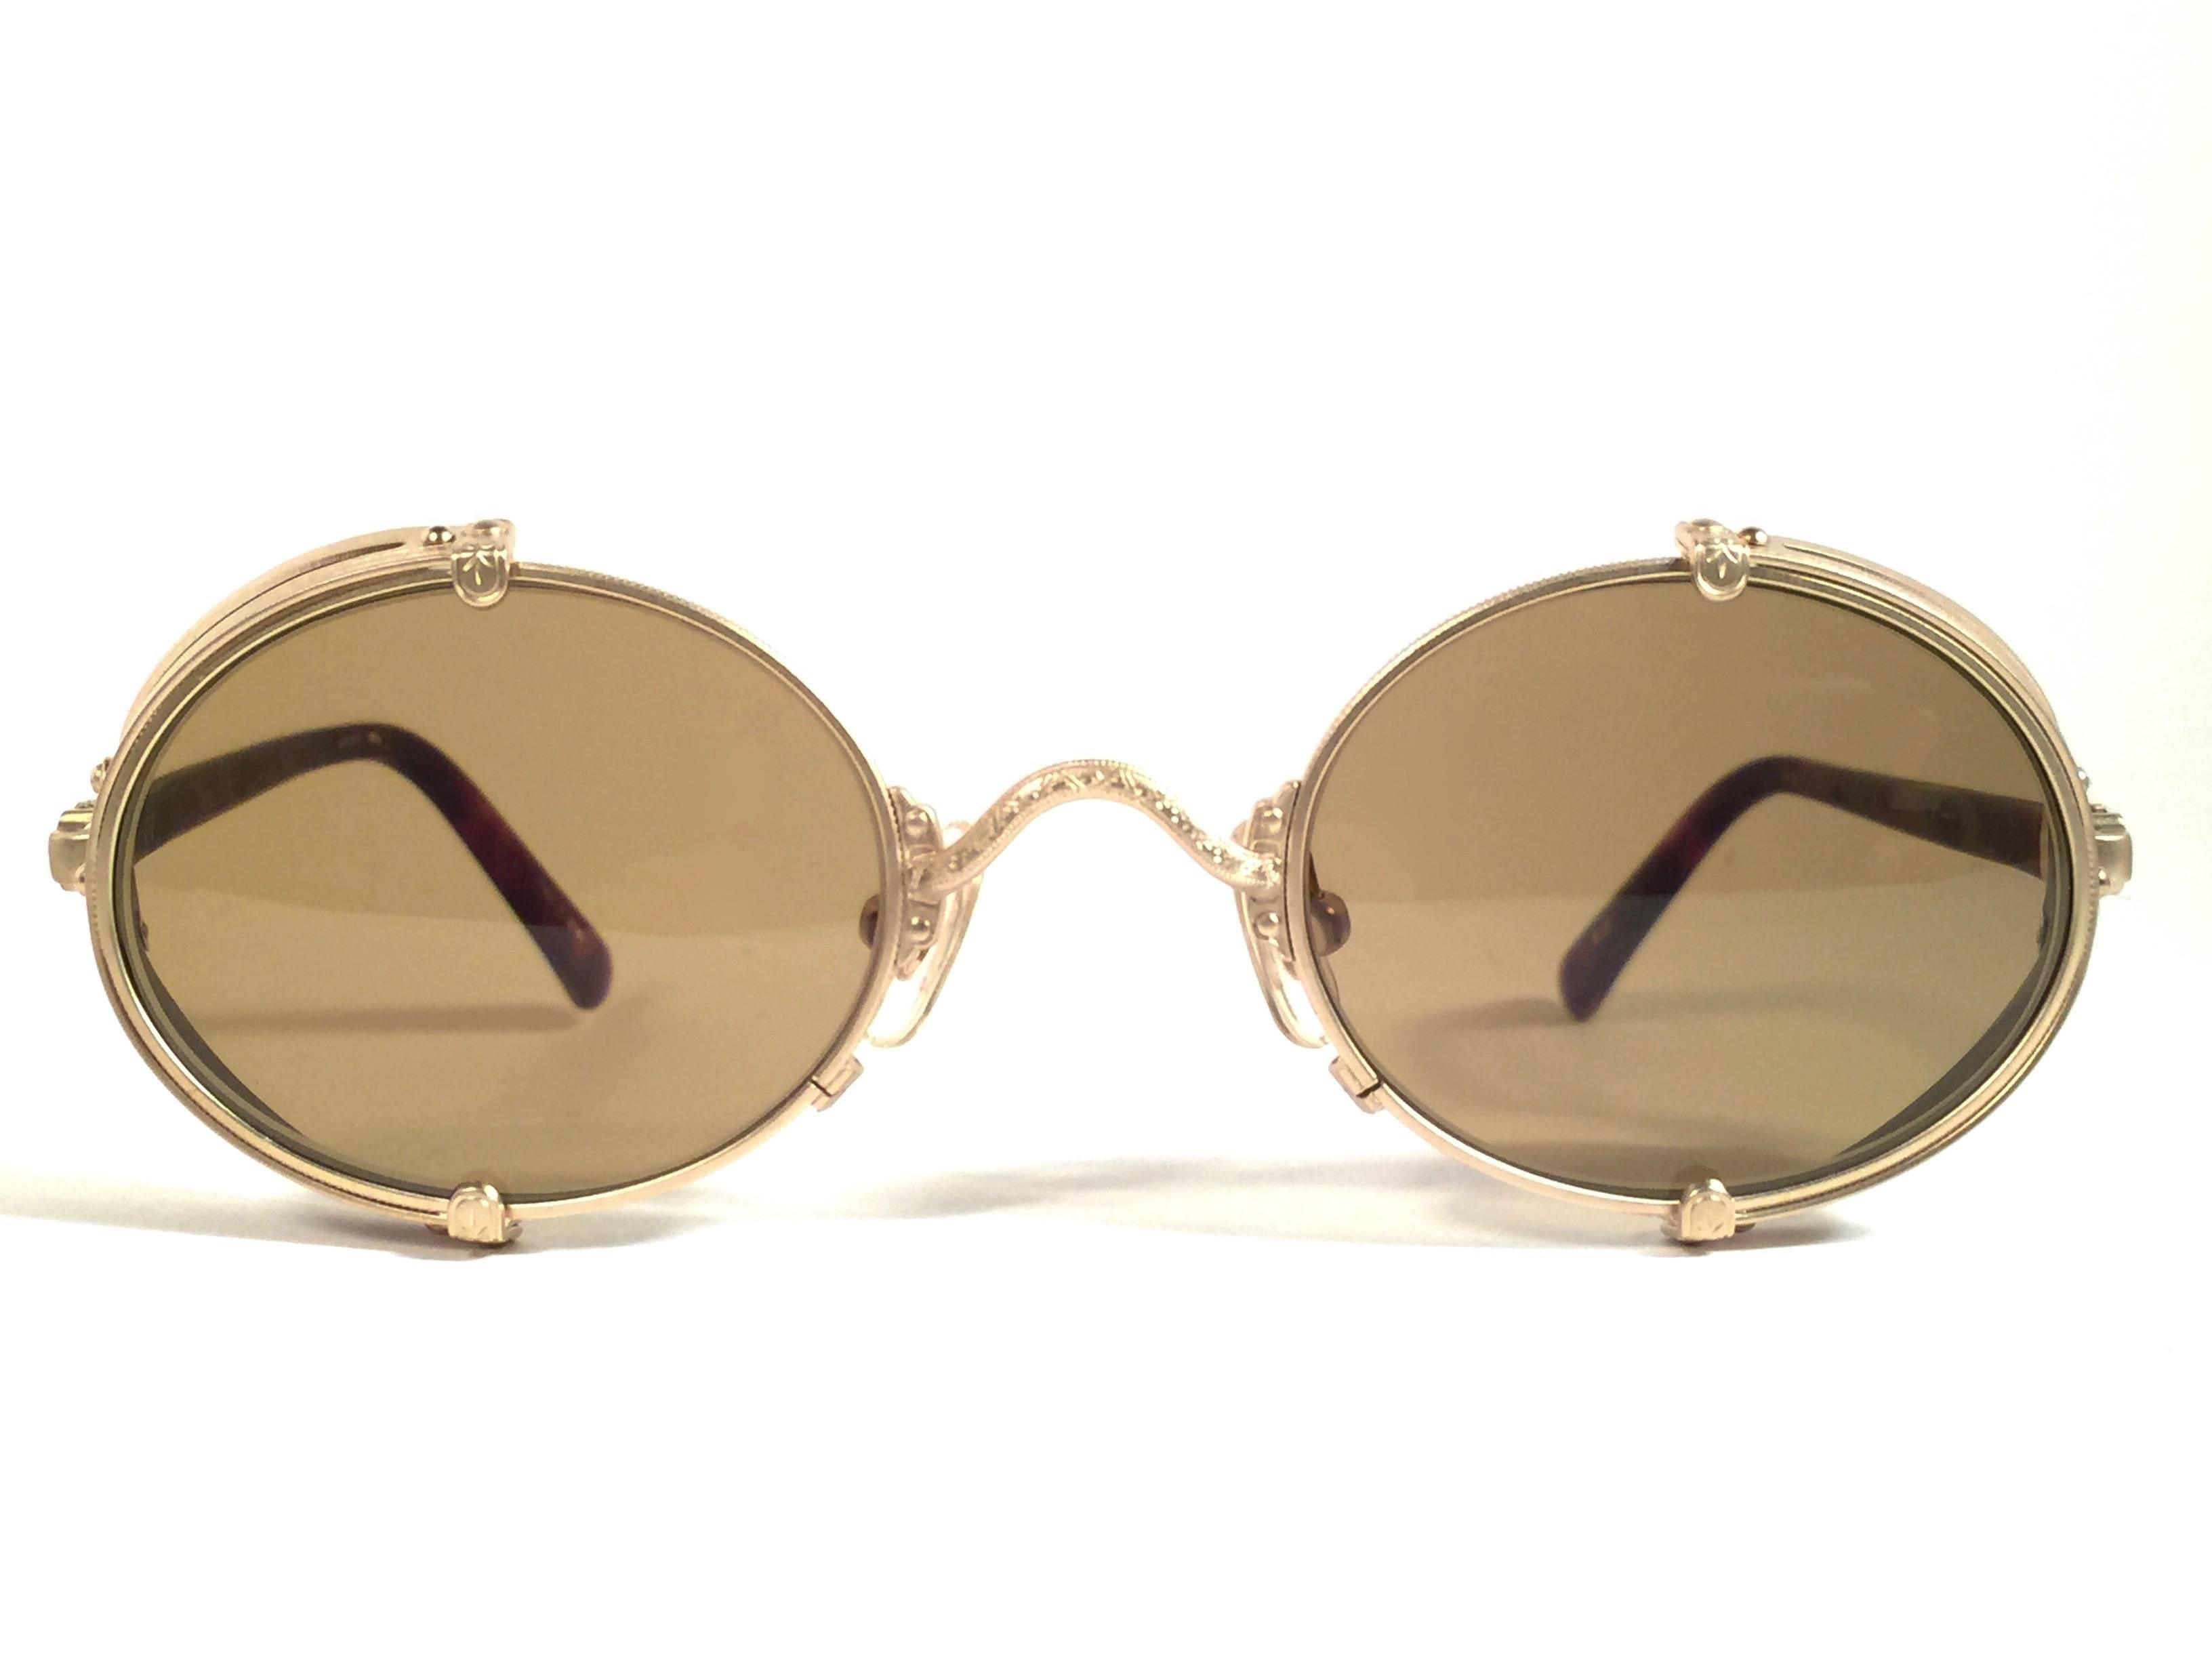 Cult brand Matsuda signed this ultra chic pair of round gold matte with brown side cups sunglasses.   
Spotless brown medium lenses.  
Superior quality and design.   
New, never worn or displayed. Made in japan.